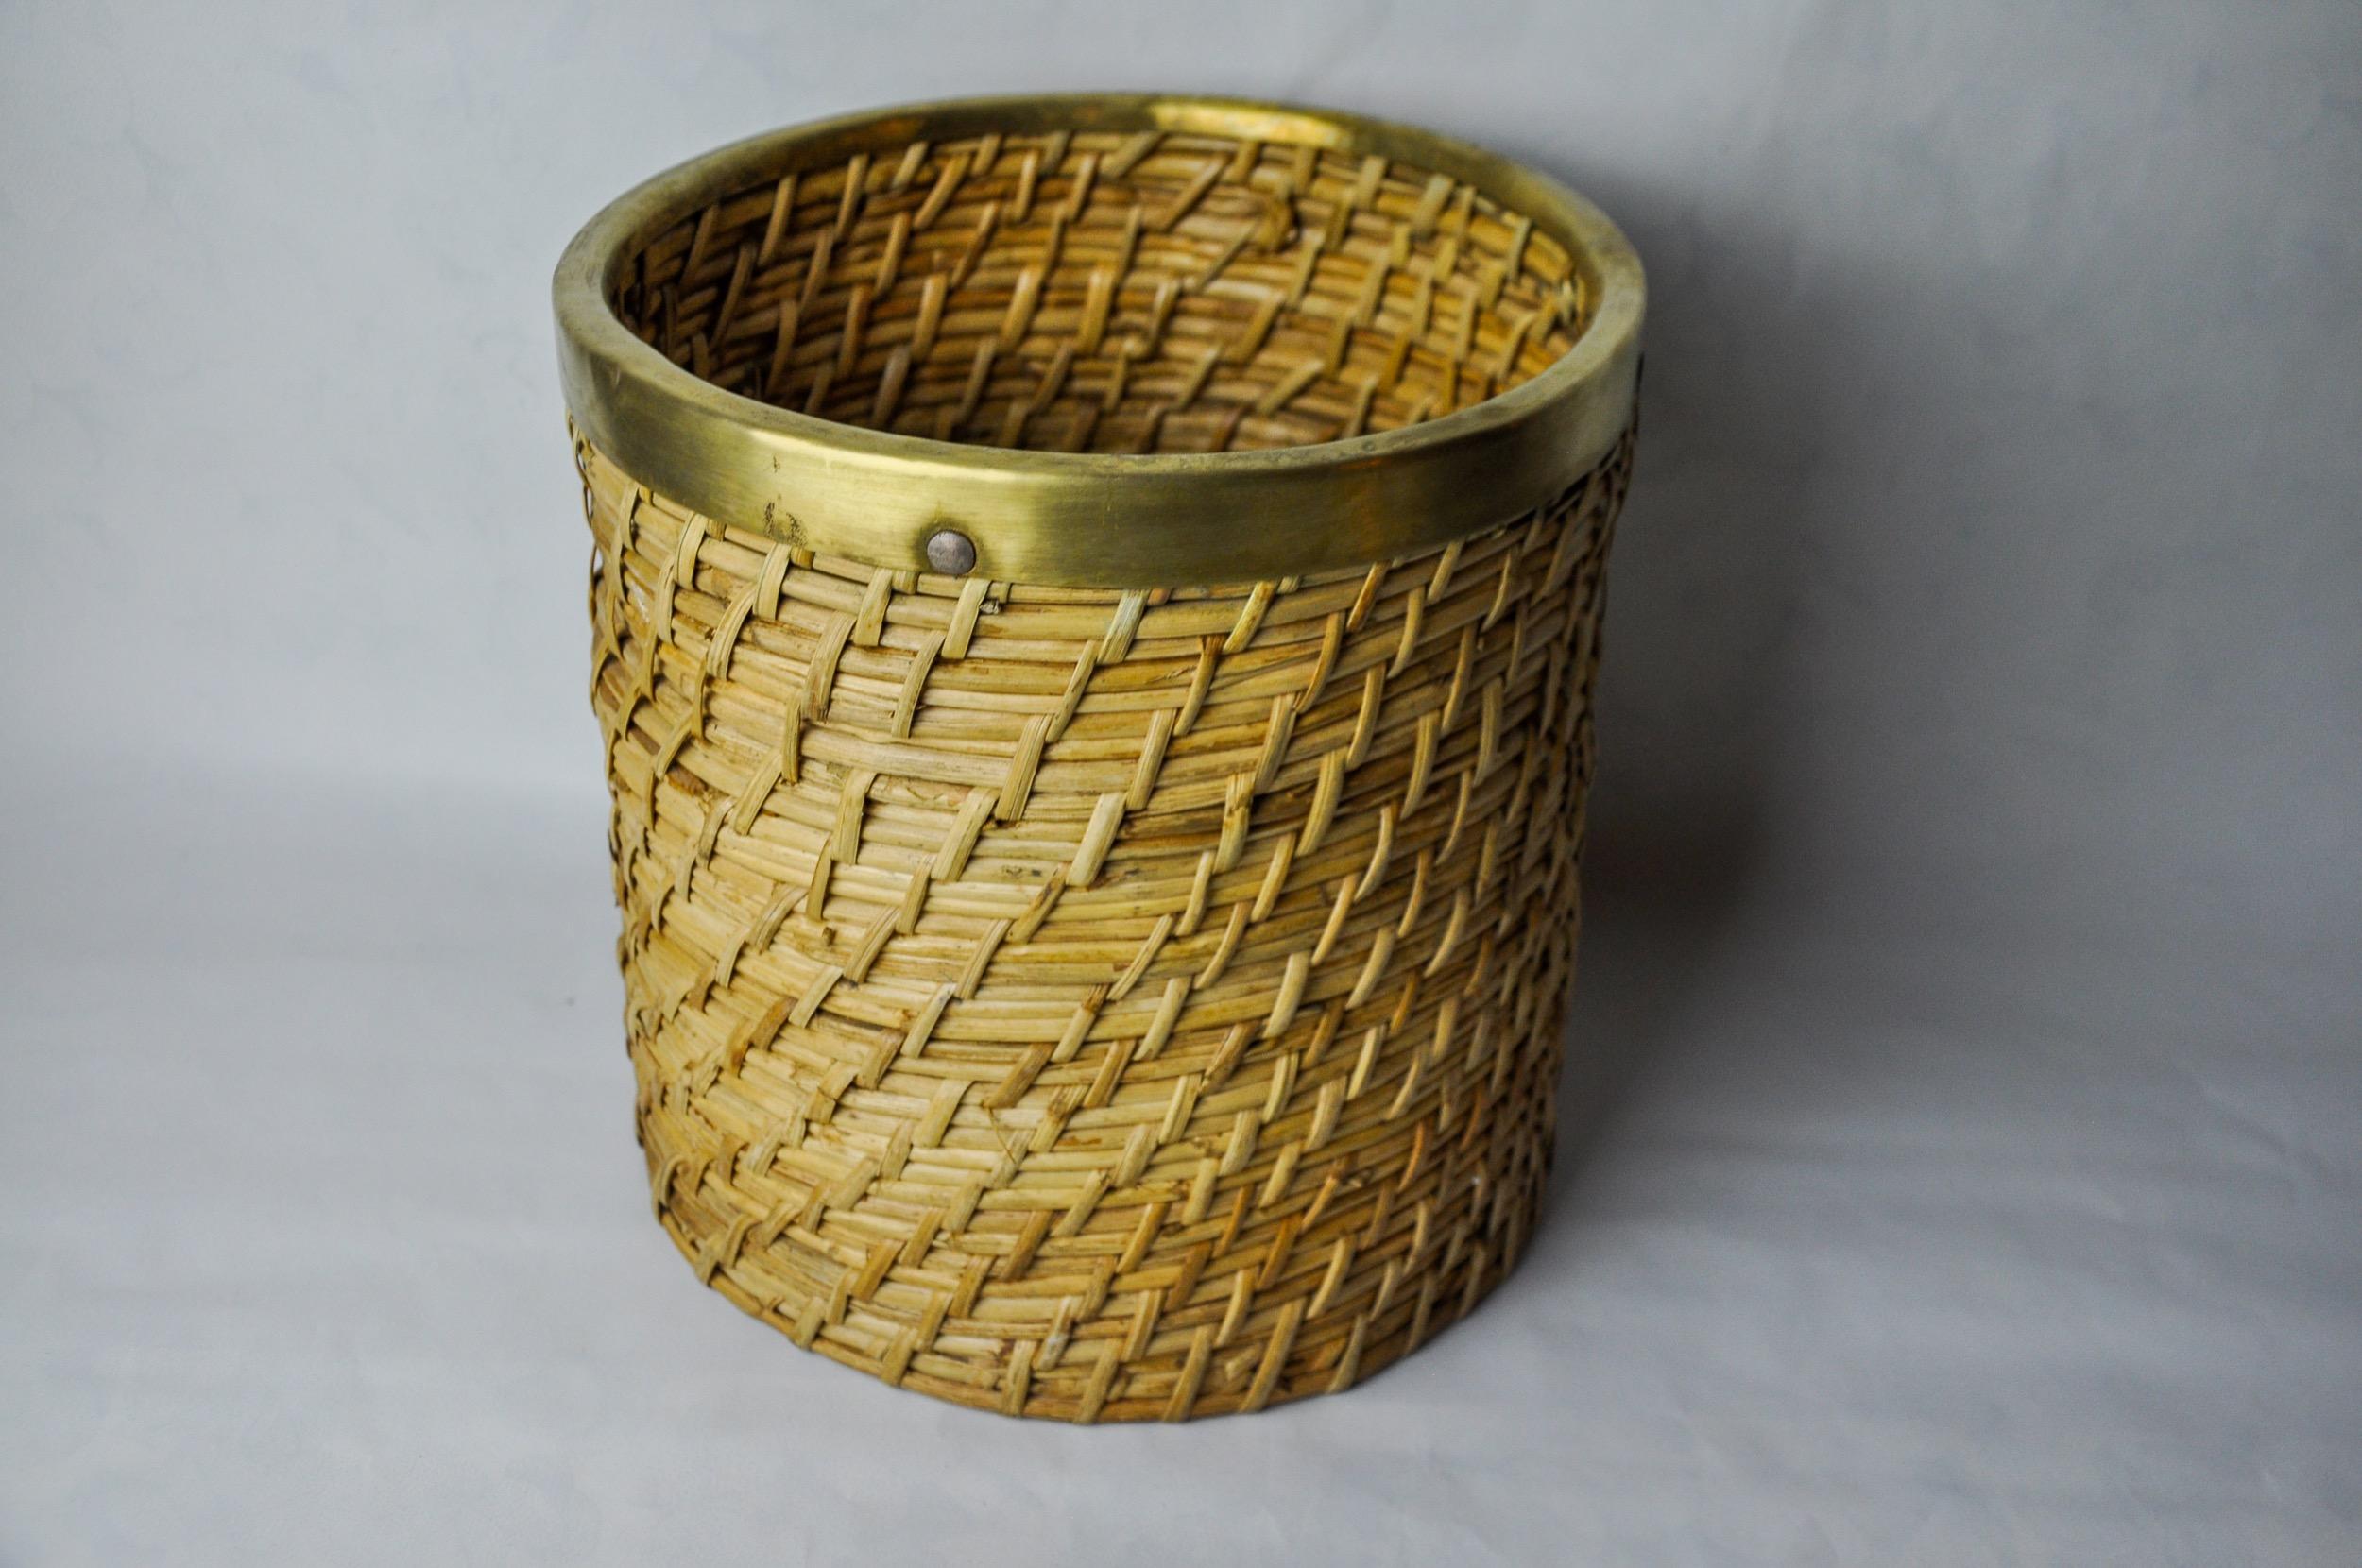 Very nice rattan and brass basket made in italy in the 1970s. Round shape, modern style of the middle of the century, it is inspired by the drawings of Gabriella Crespi. Beautiful decorative object that will bring a real design touch to your